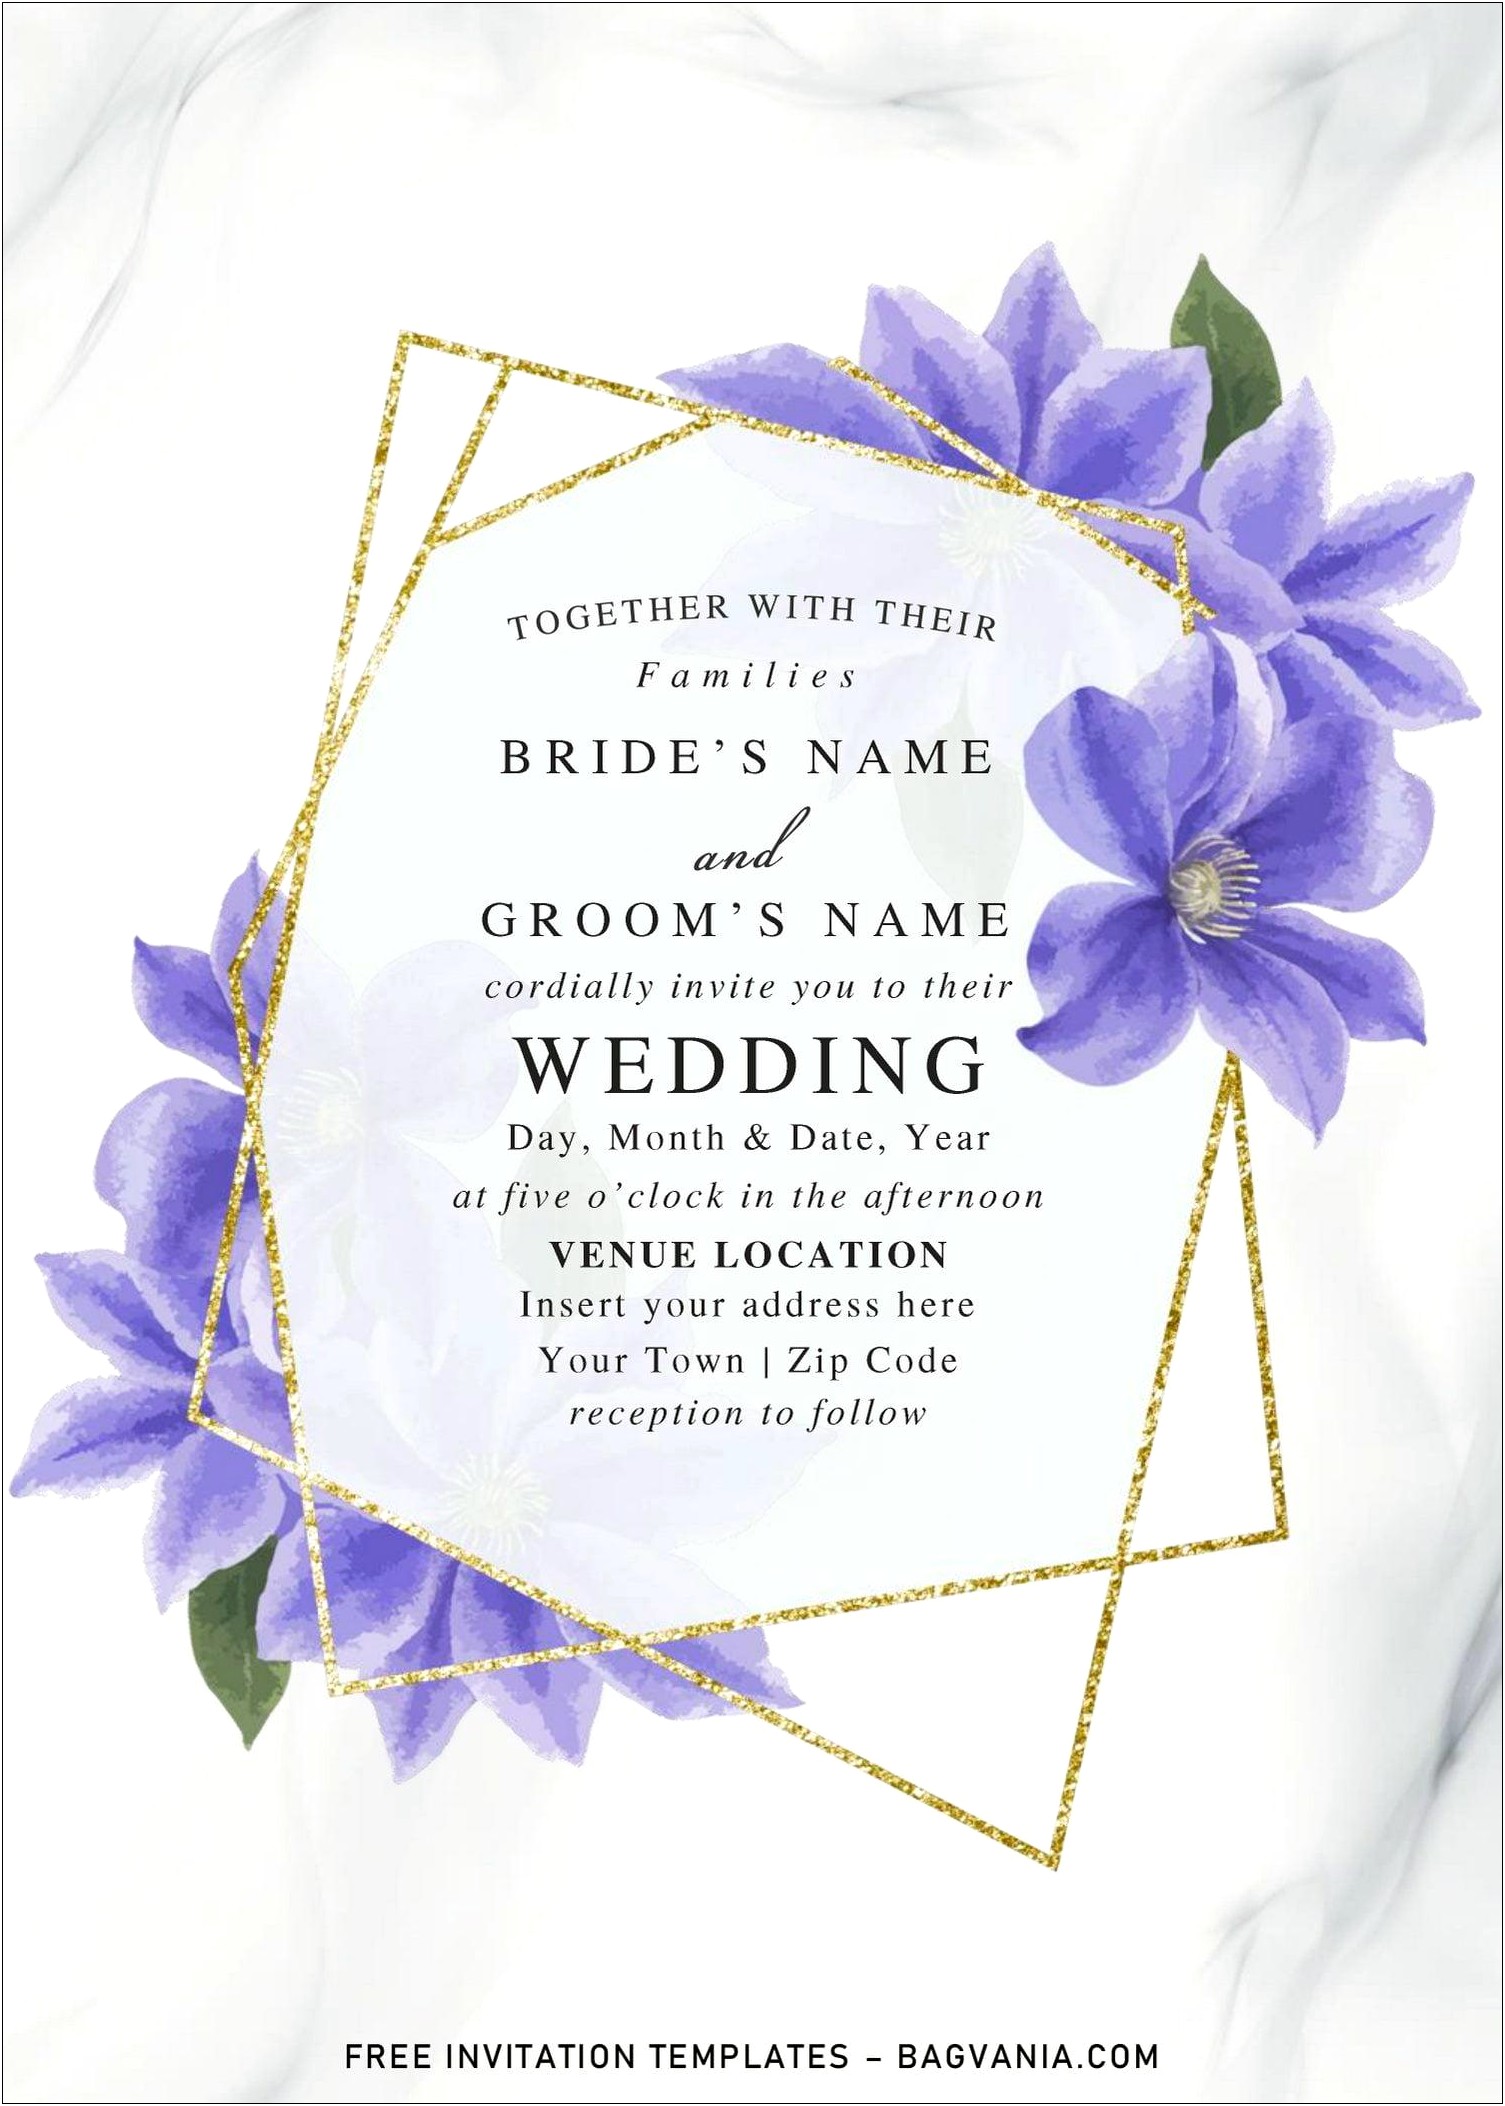 You Are Cordially Invited Template Free